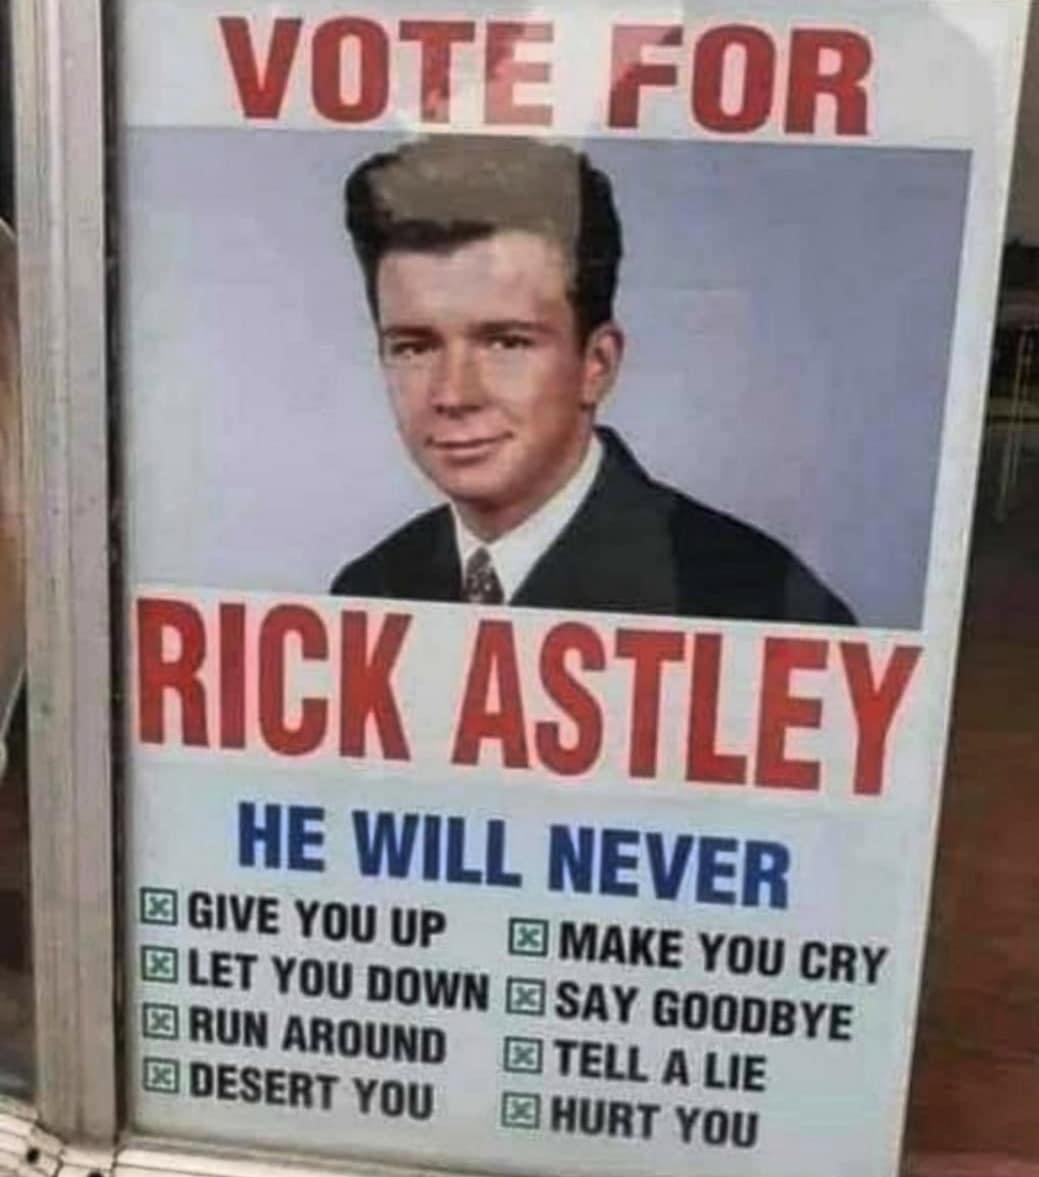 rick astley - Vote For Rick Astley He Will Never X Give You Up Make You Cry Let You Down Say Goodbye Run Around Tell A Lie Desert You Hurt You